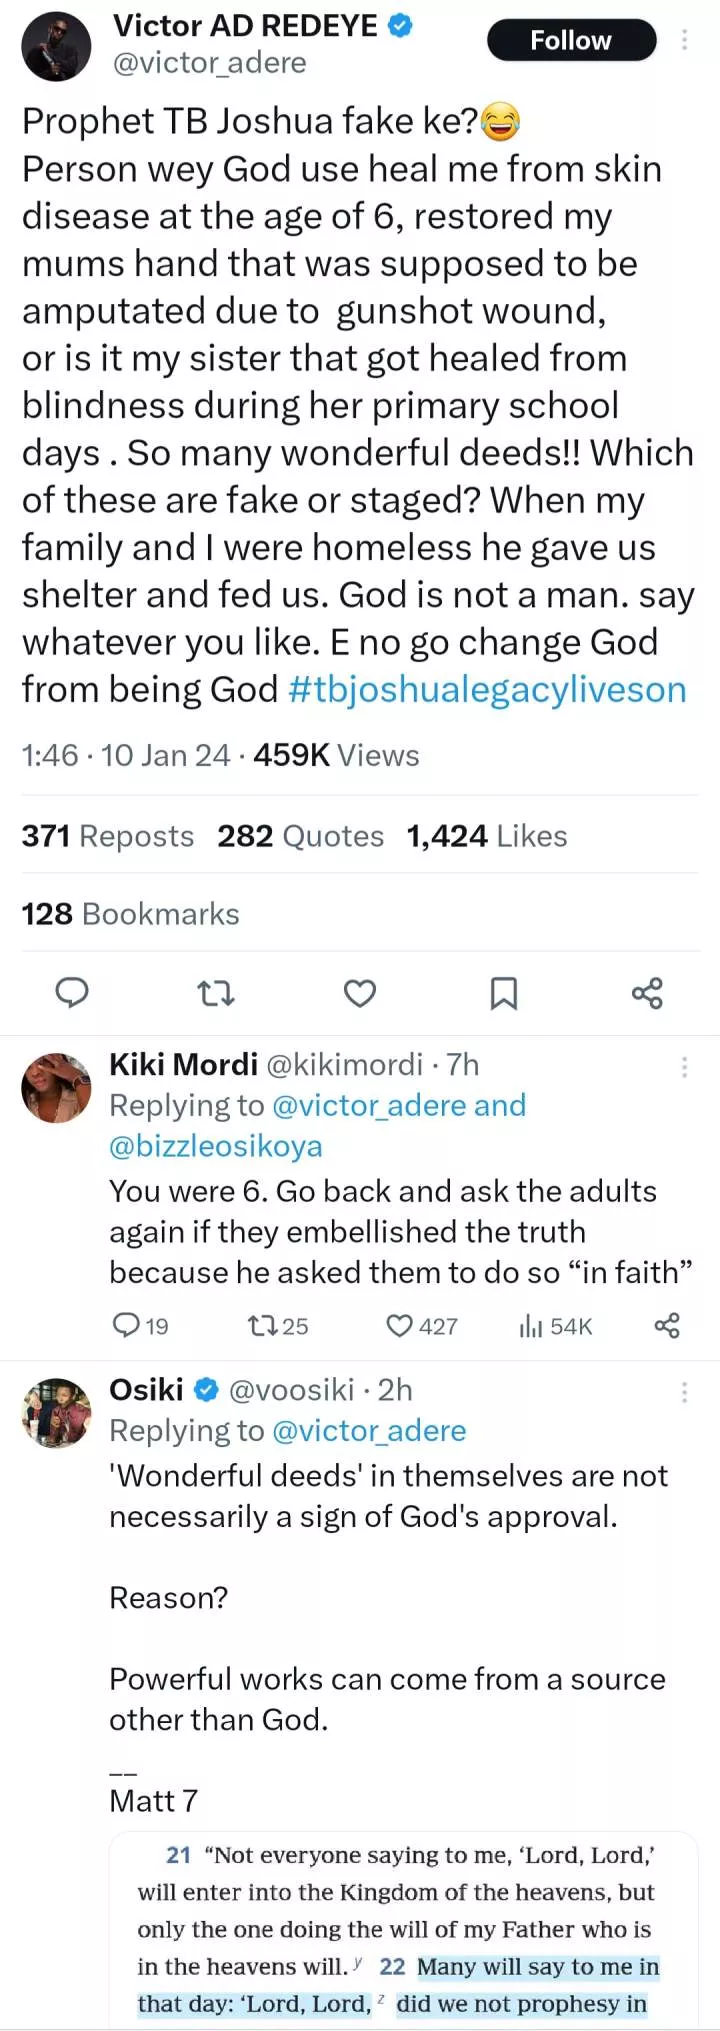 Victor Adere details miracles TB Joshua performed in his life after Seun Kuti said the late prophet never performed any real miracle